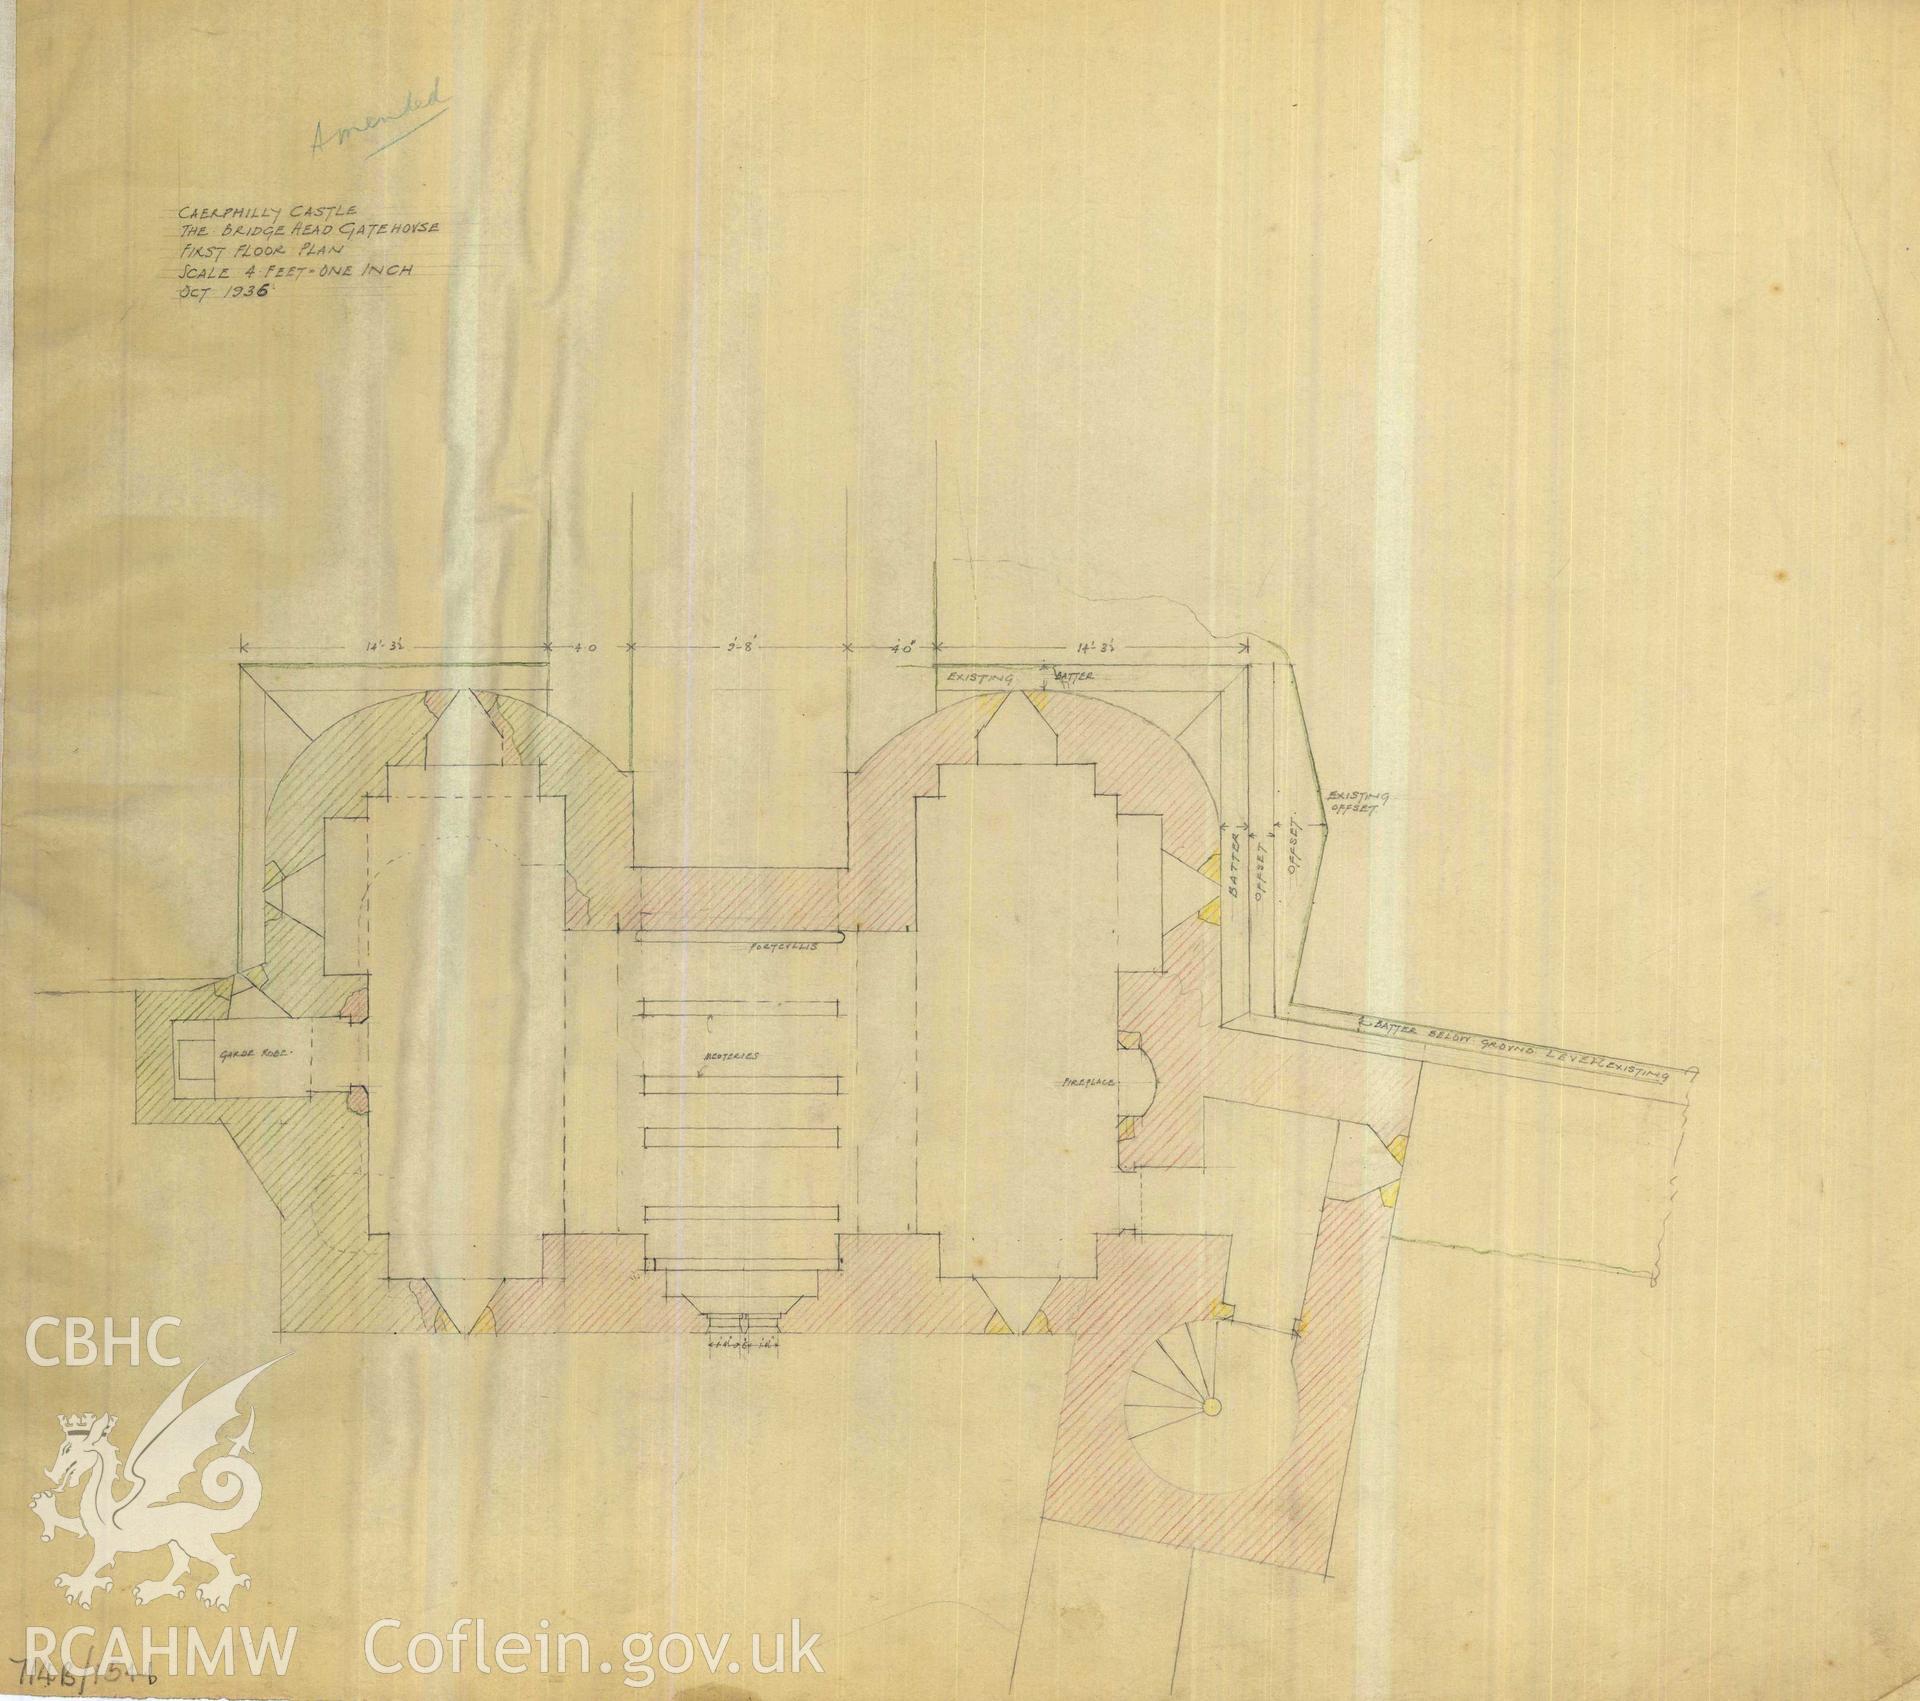 Cadw guardianship monument drawing of Caerphilly Castle. Dam, S gate, upper floor plan (ii). Cadw Ref. No:714B/154b. Scale 1:48.